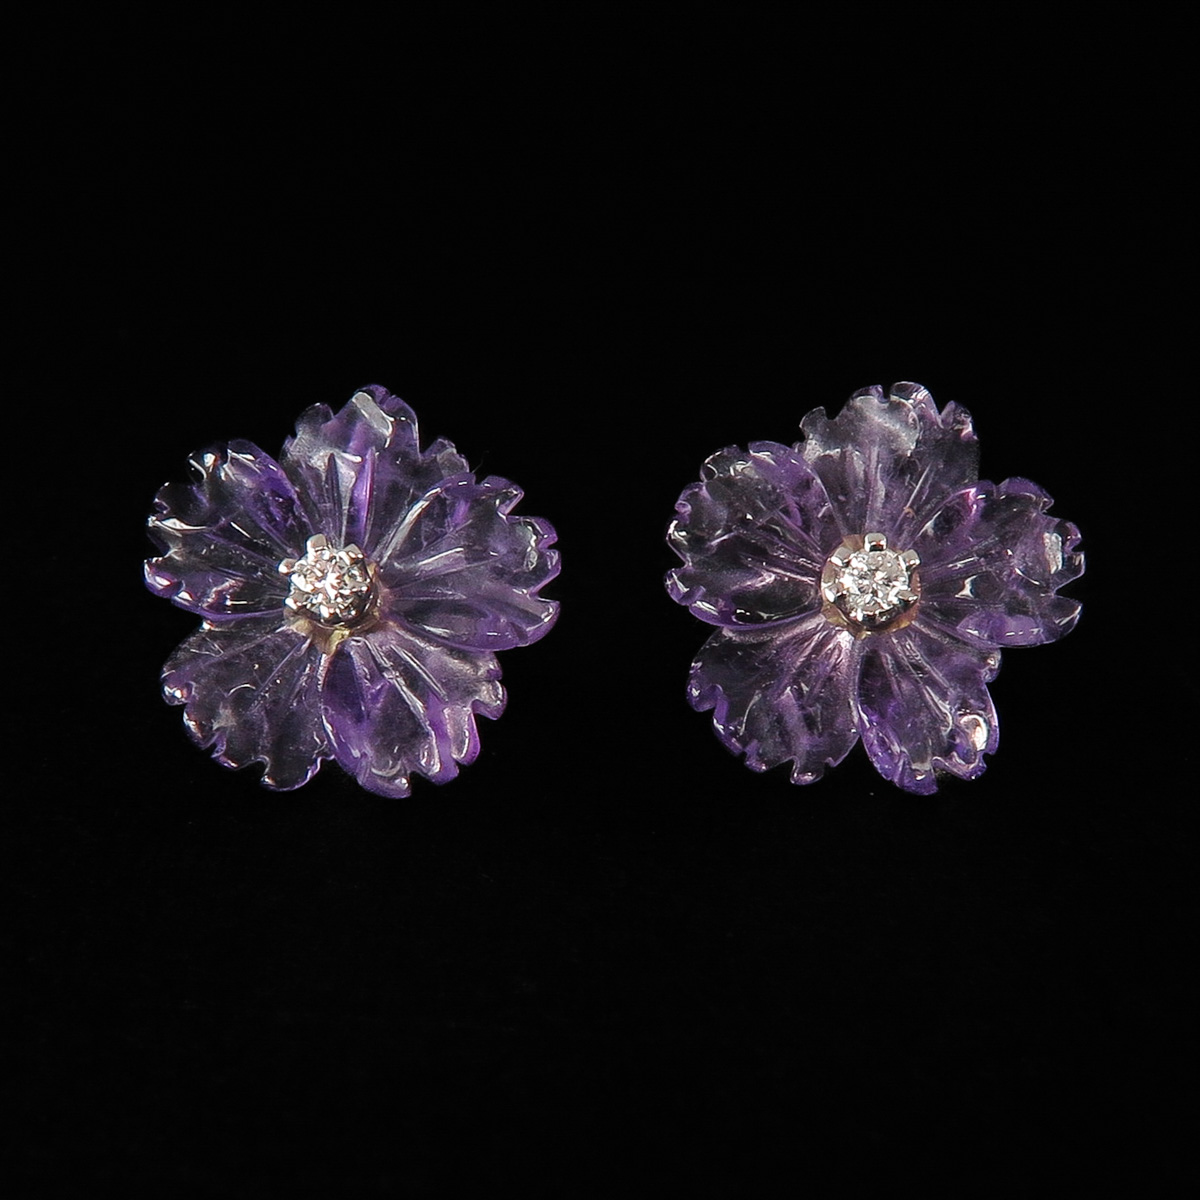 A Pair of Diamond and Amethyst Earrings